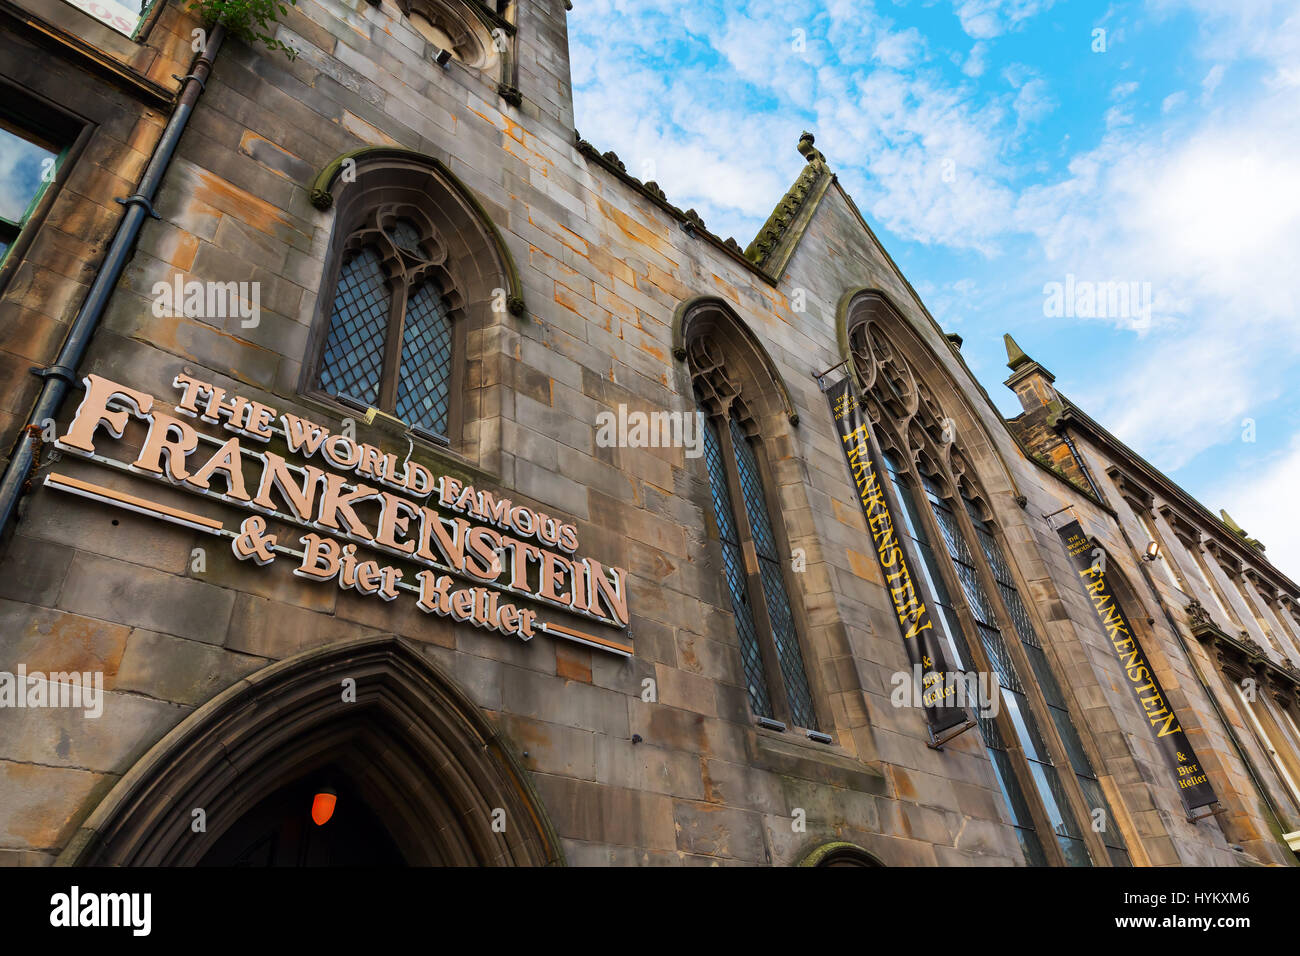 Edinburgh, Scotland - September 09, 2016: Frankenstein pub in the old town of Edinburgh. It is a bier keller in a suitably gothic setting of an old ch Stock Photo